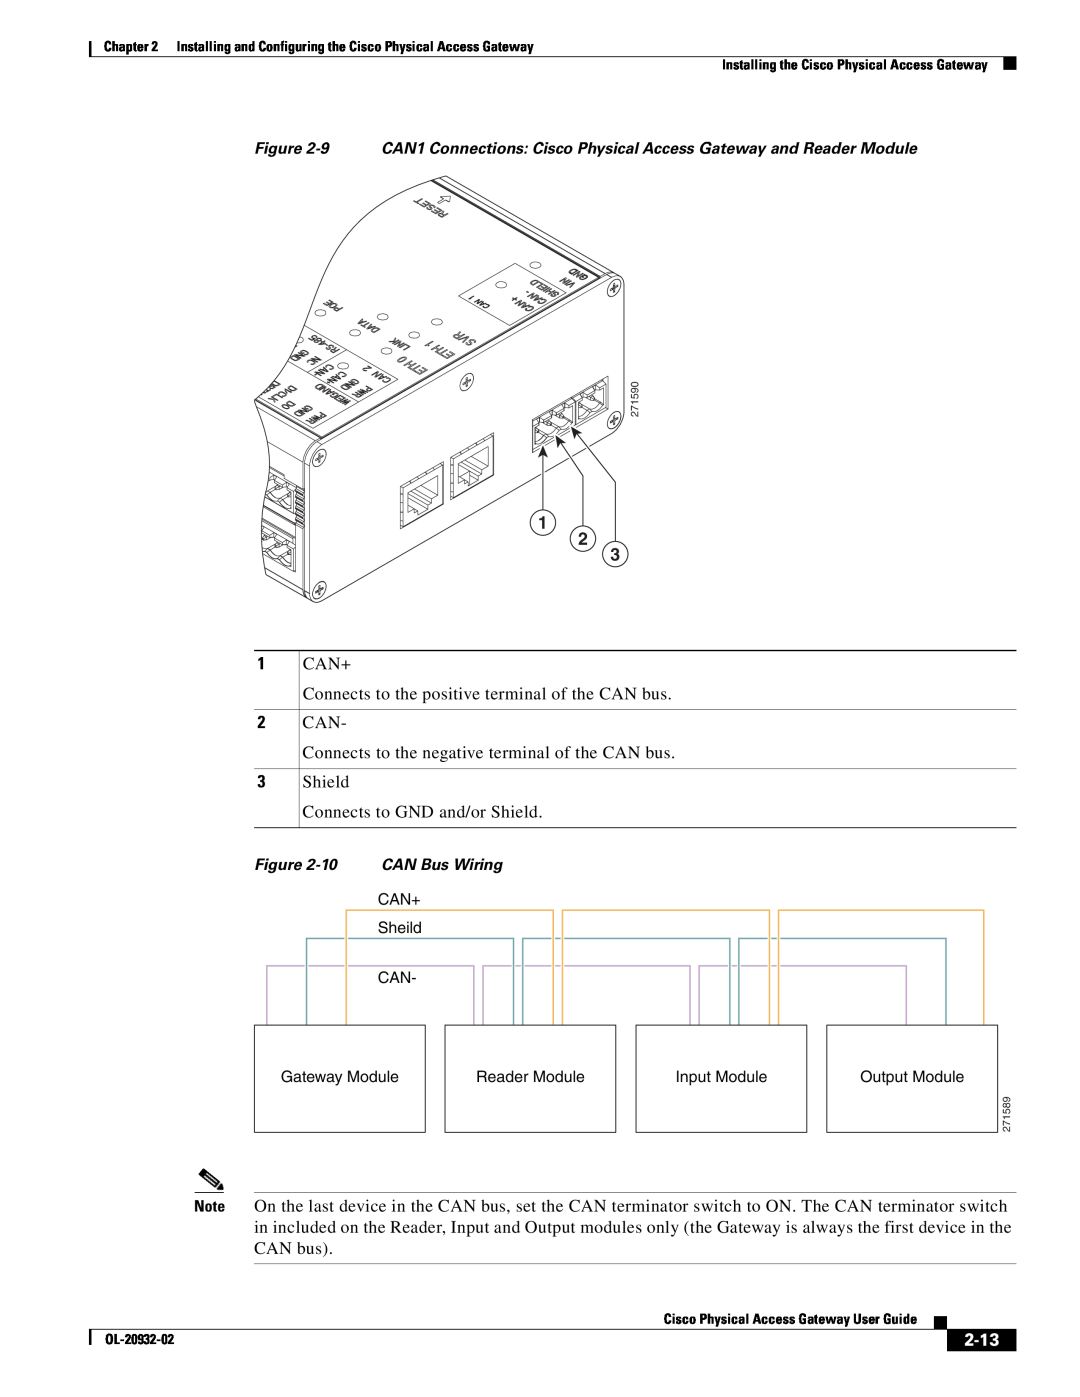 Cisco Systems OL-20932-02 manual 2-13, CAN+ Connects to the positive terminal of the CAN bus CAN 